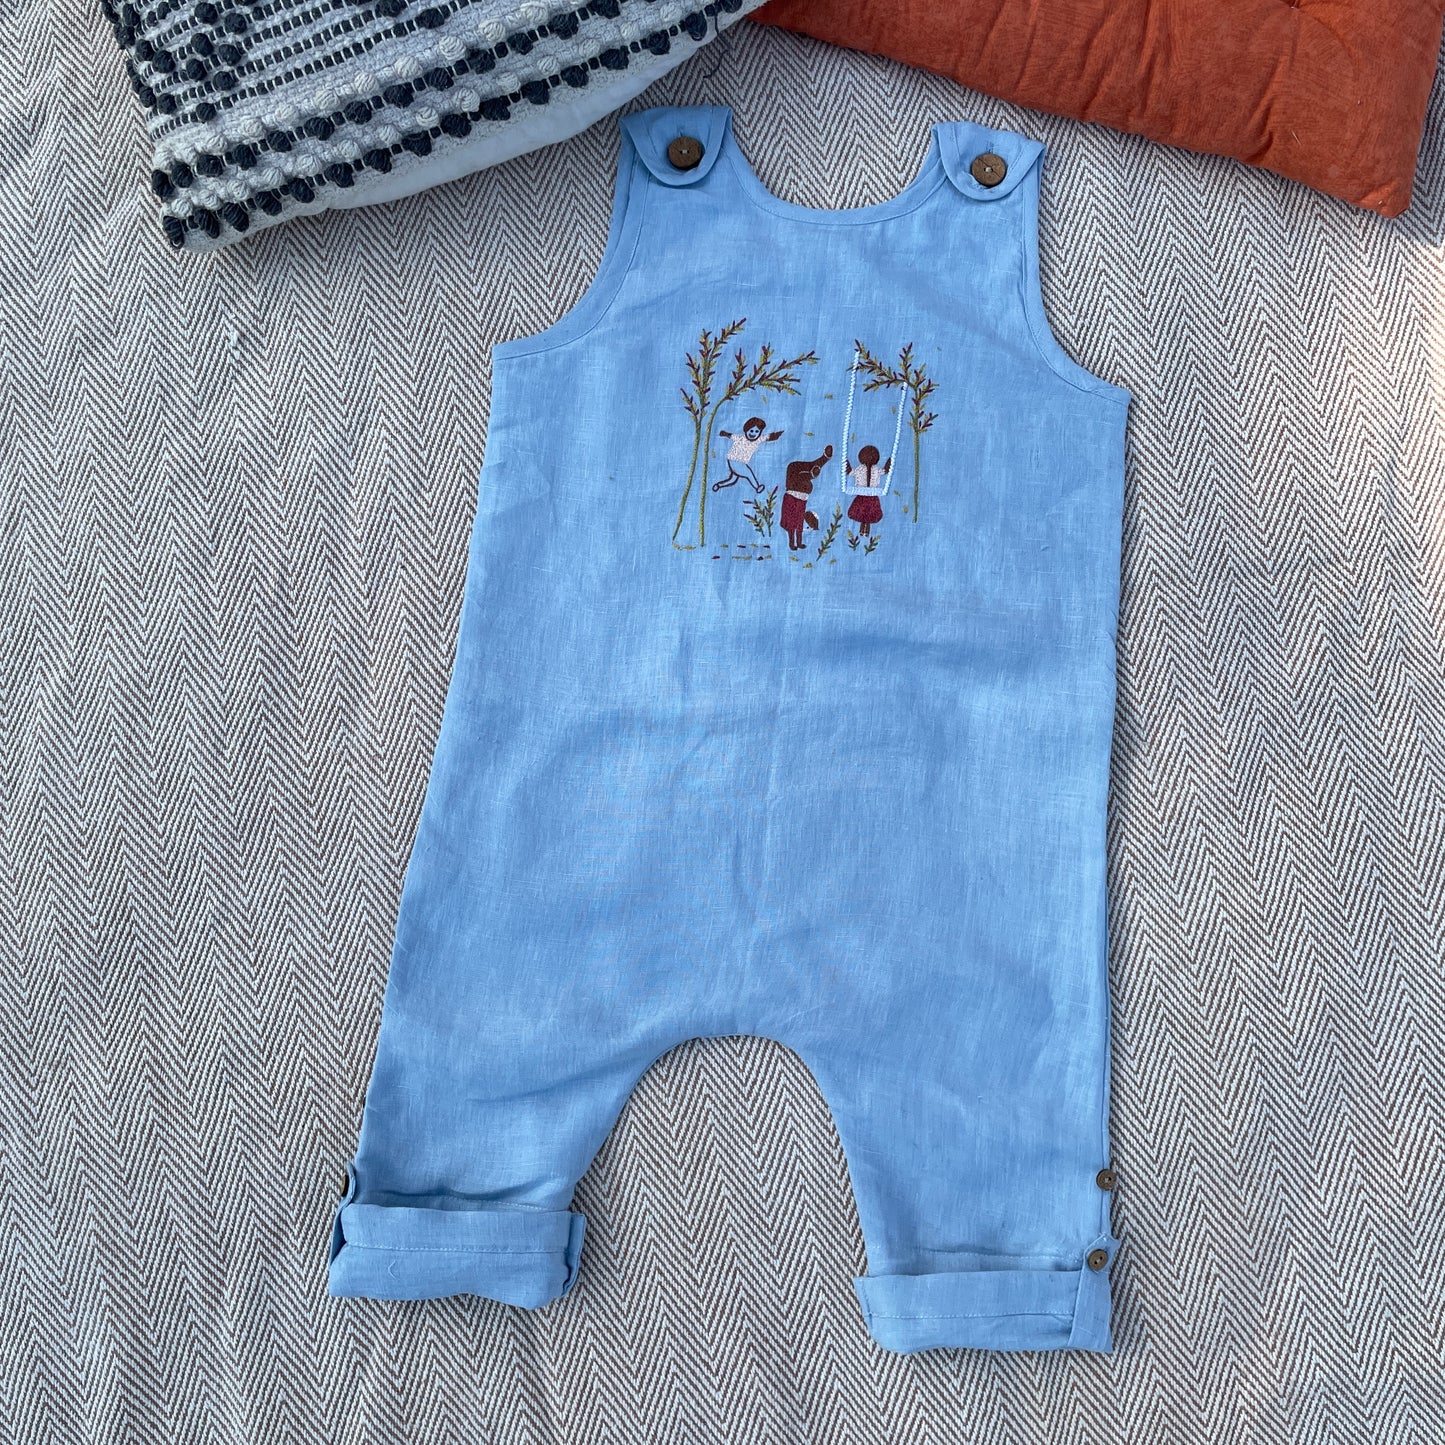 A day at the park romper